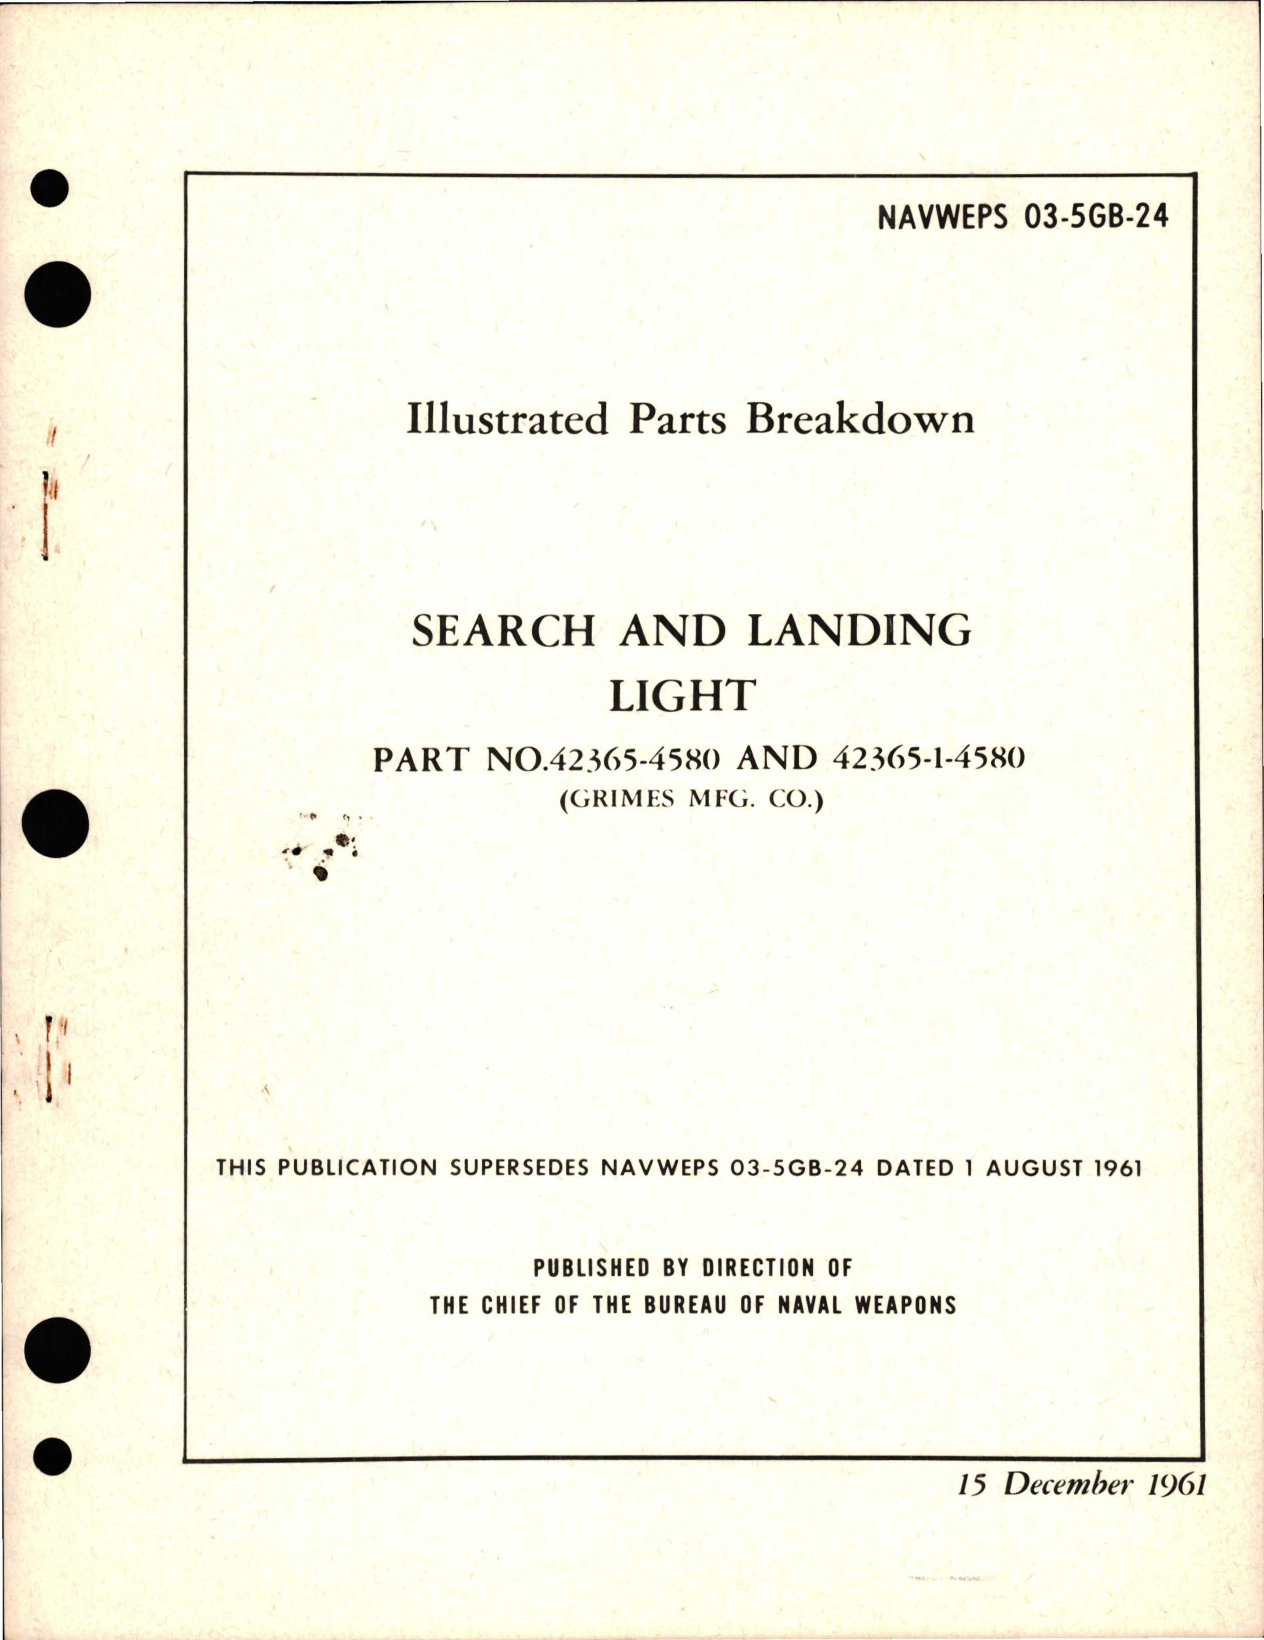 Sample page 1 from AirCorps Library document: Illustrated Parts Breakdown for Search and Landing Light - Parts 42365-4580 and 42365-1-4580